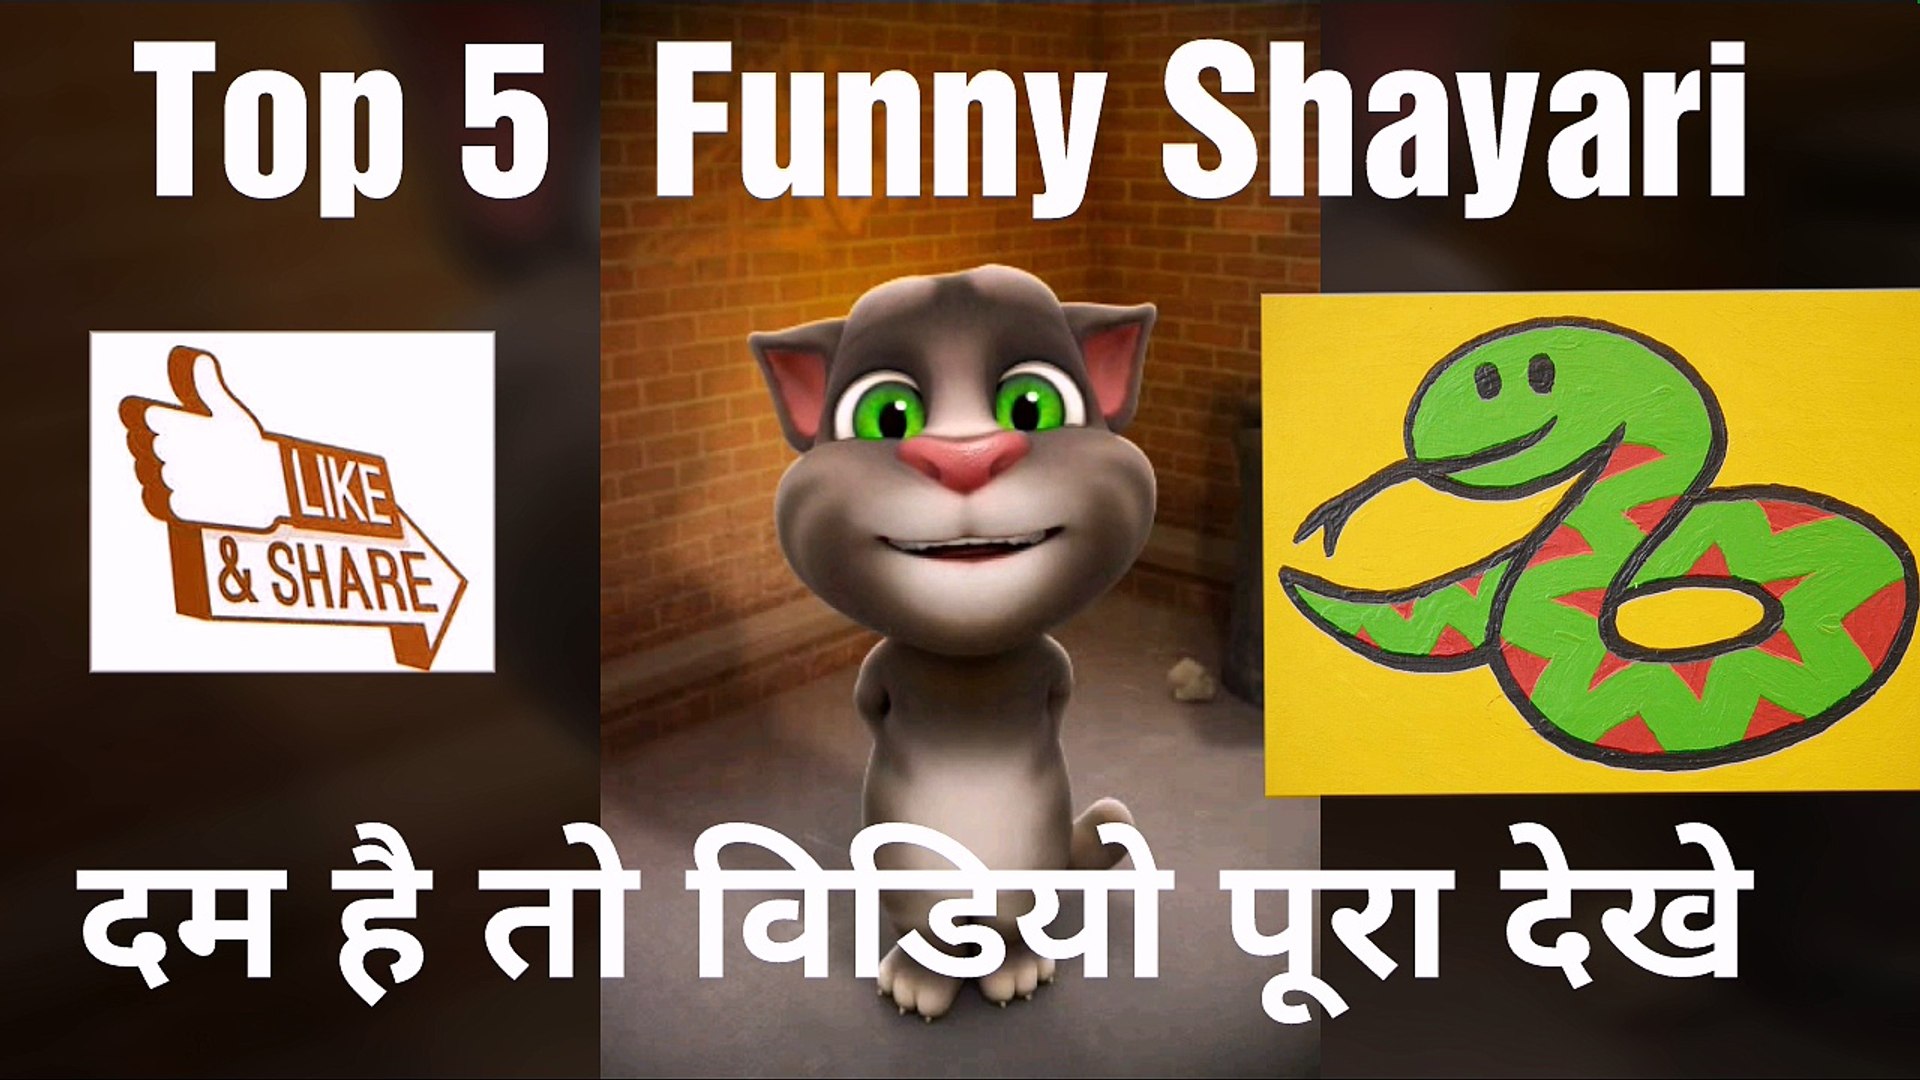 Top 5 funny shayari of all time - video Dailymotion